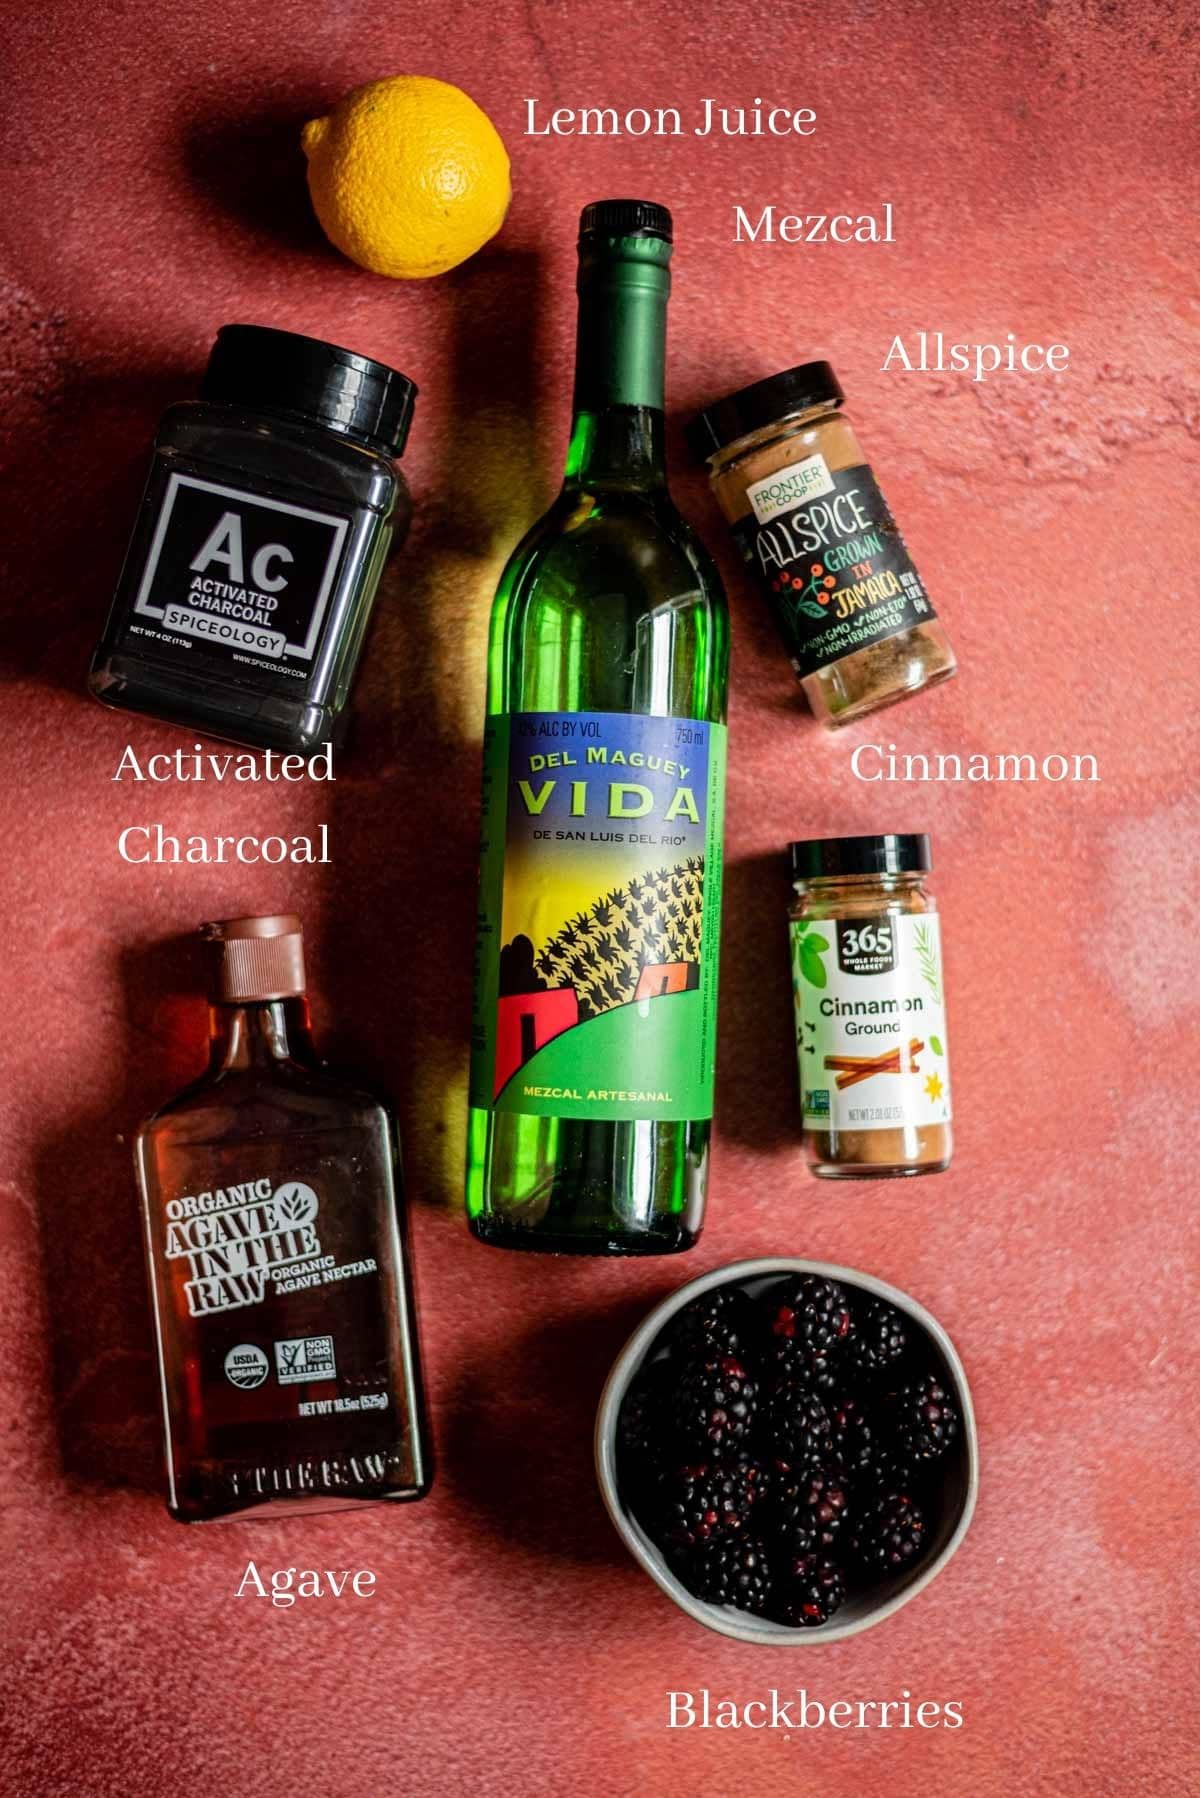 Ingredients for the cocktail on a red stone table.